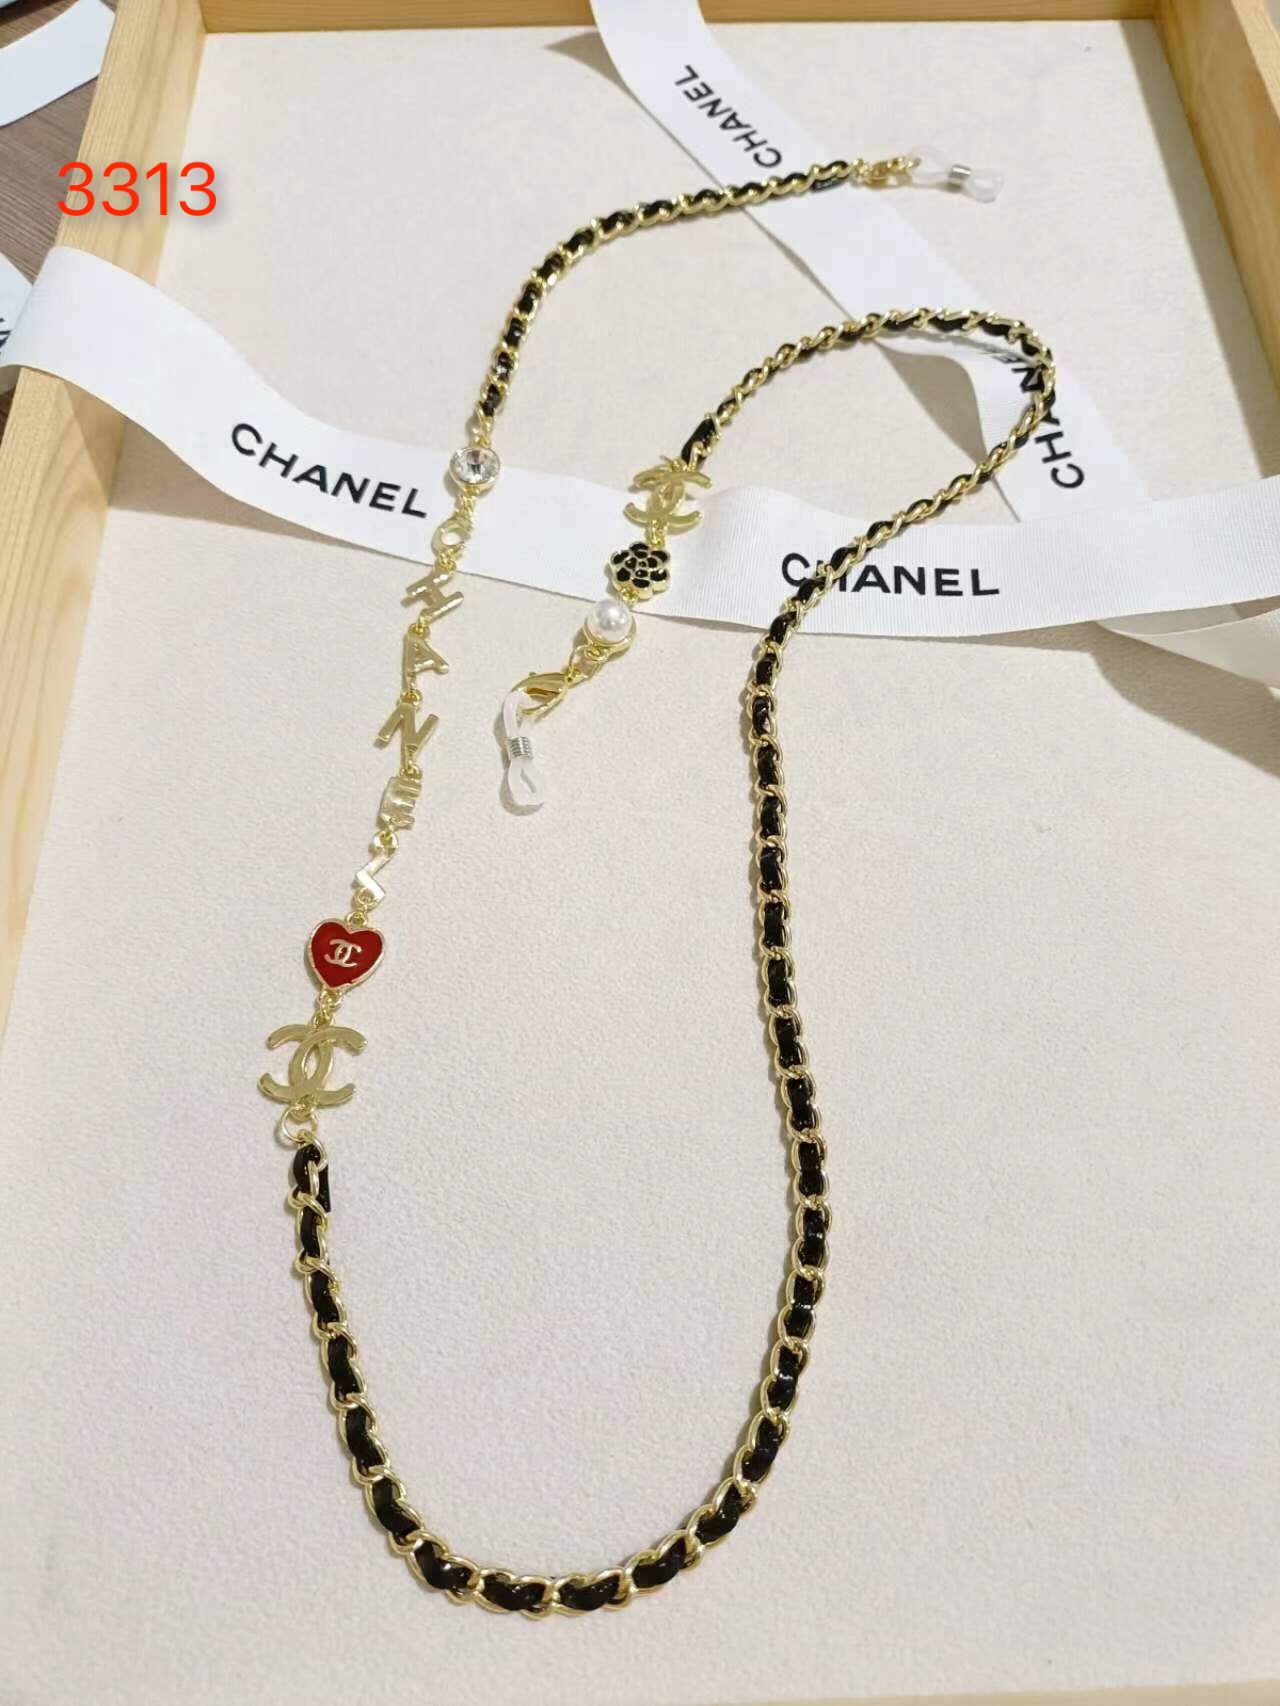 Chanel glasses chain necklace 109699